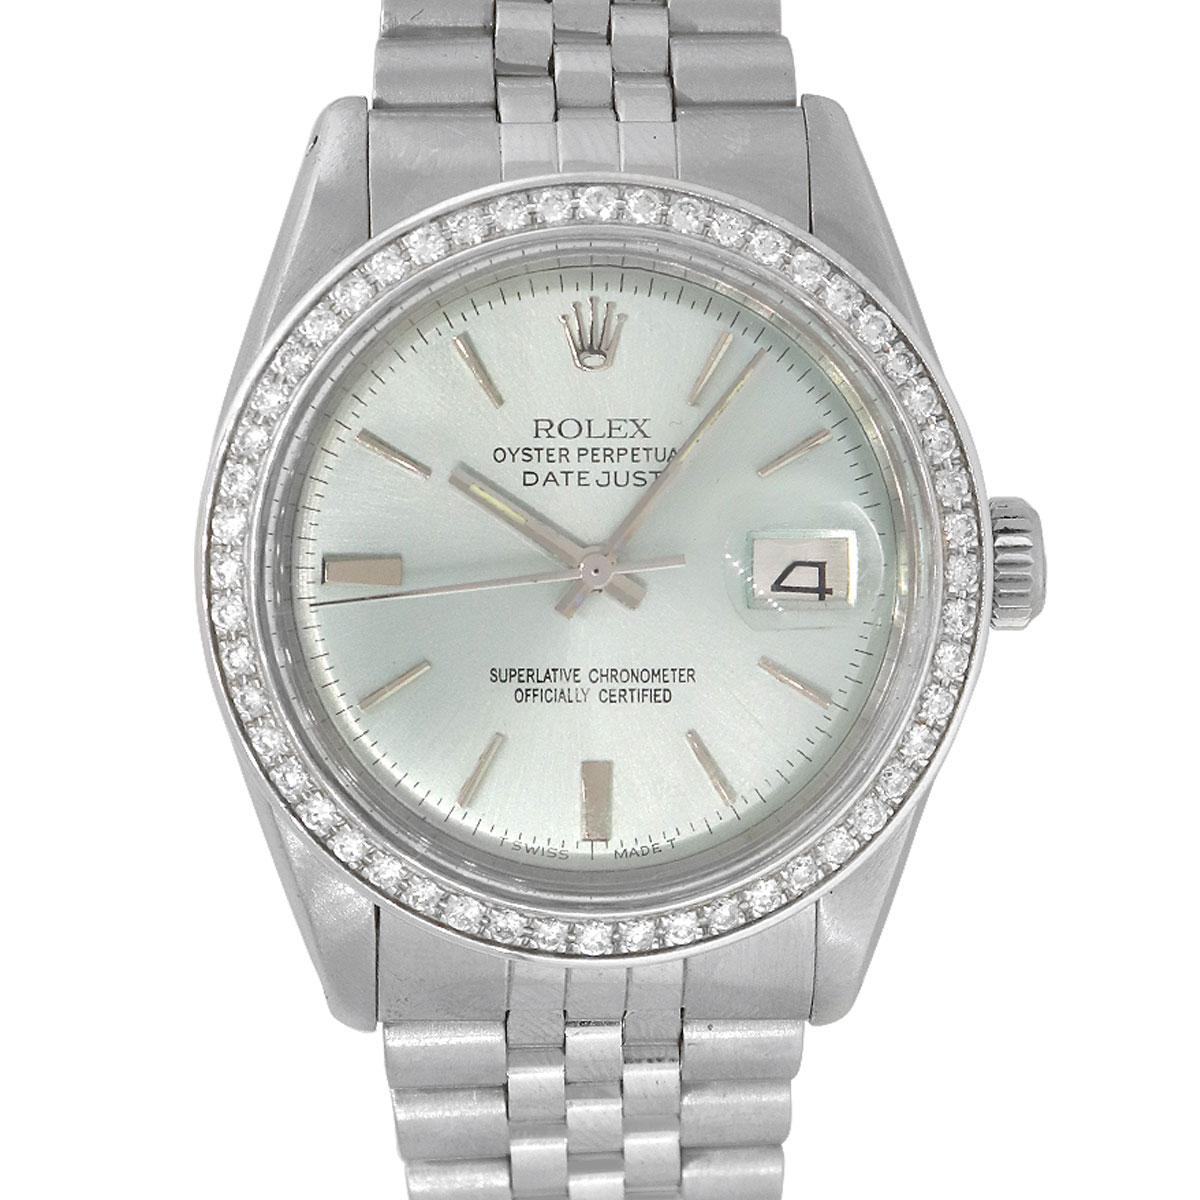 Brand: Rolex
MPN: 1601
Model: Datejust
Case Material: Stainless steel
Case Diameter: 36mm
Crystal: Plastic
Bezel: Aftermarket Diamond bezel
Dial: Teal dial with silver stick hour markers and silver hands. Date can be found at 3 o'clock
Bracelet: